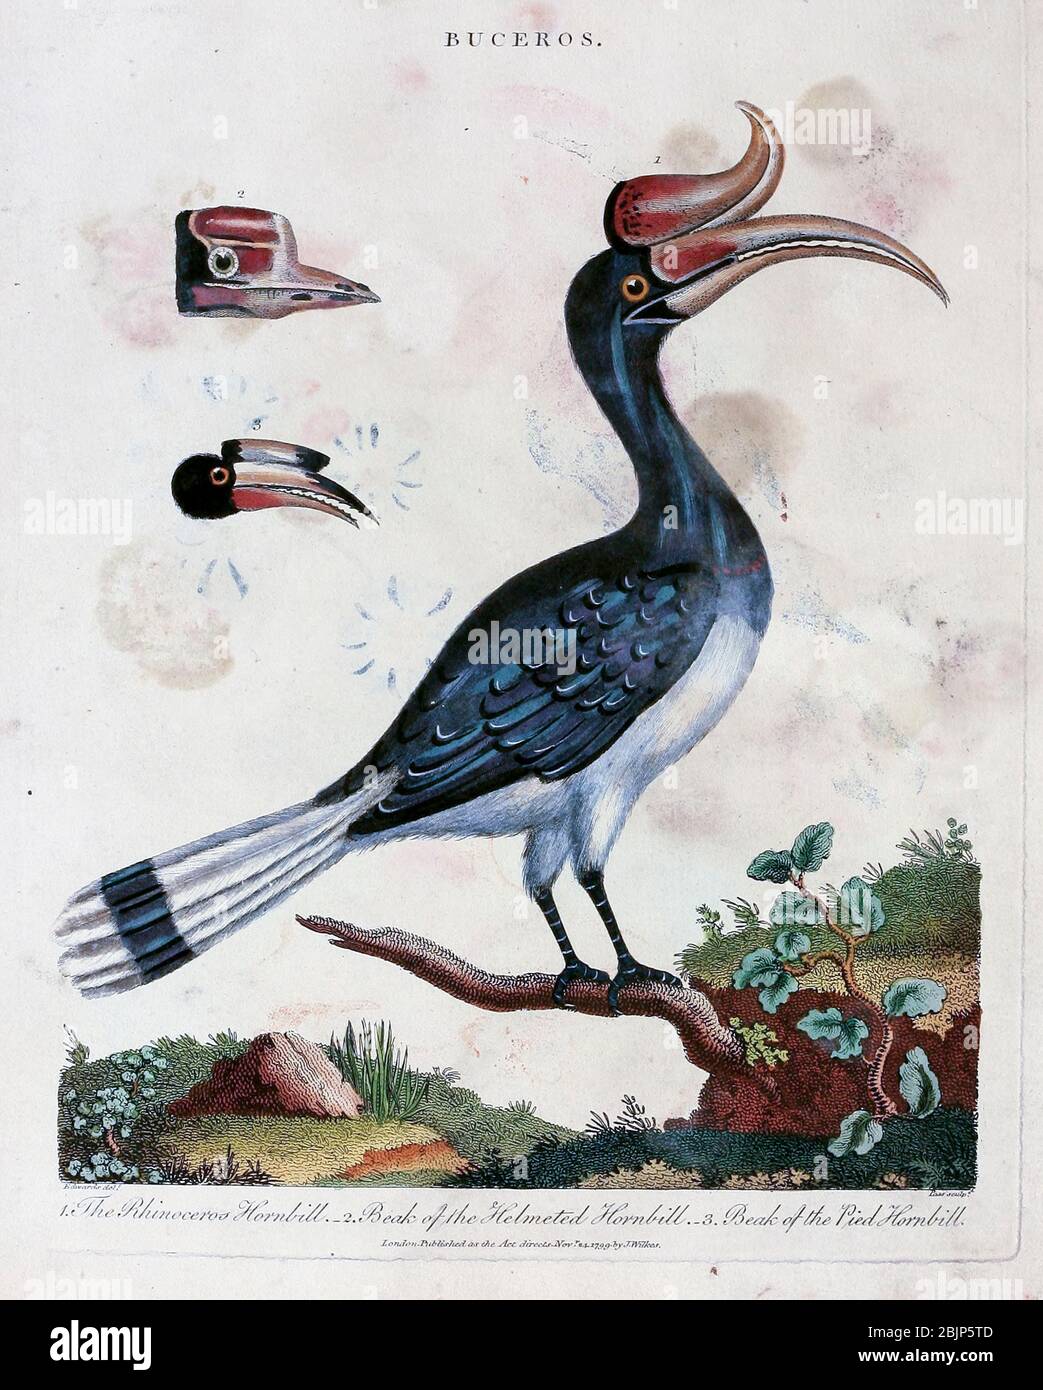 Buceros (Asian Hornbills) 1. The Rhinoceros Hornbill (Buceros rhinoceros) 2. beak of the Helmeted Hornbill (Rhinoplax vigil) 3. Beak of the pied Hornbill (Anthracoceros albirostris). Copper engraving with hand colouring from Encyclopaedia Londinensis, or, Universal dictionary of arts, sciences, and literature [miscellaneous plates] by Wilkes, John Publication date 1796-1829 Stock Photo